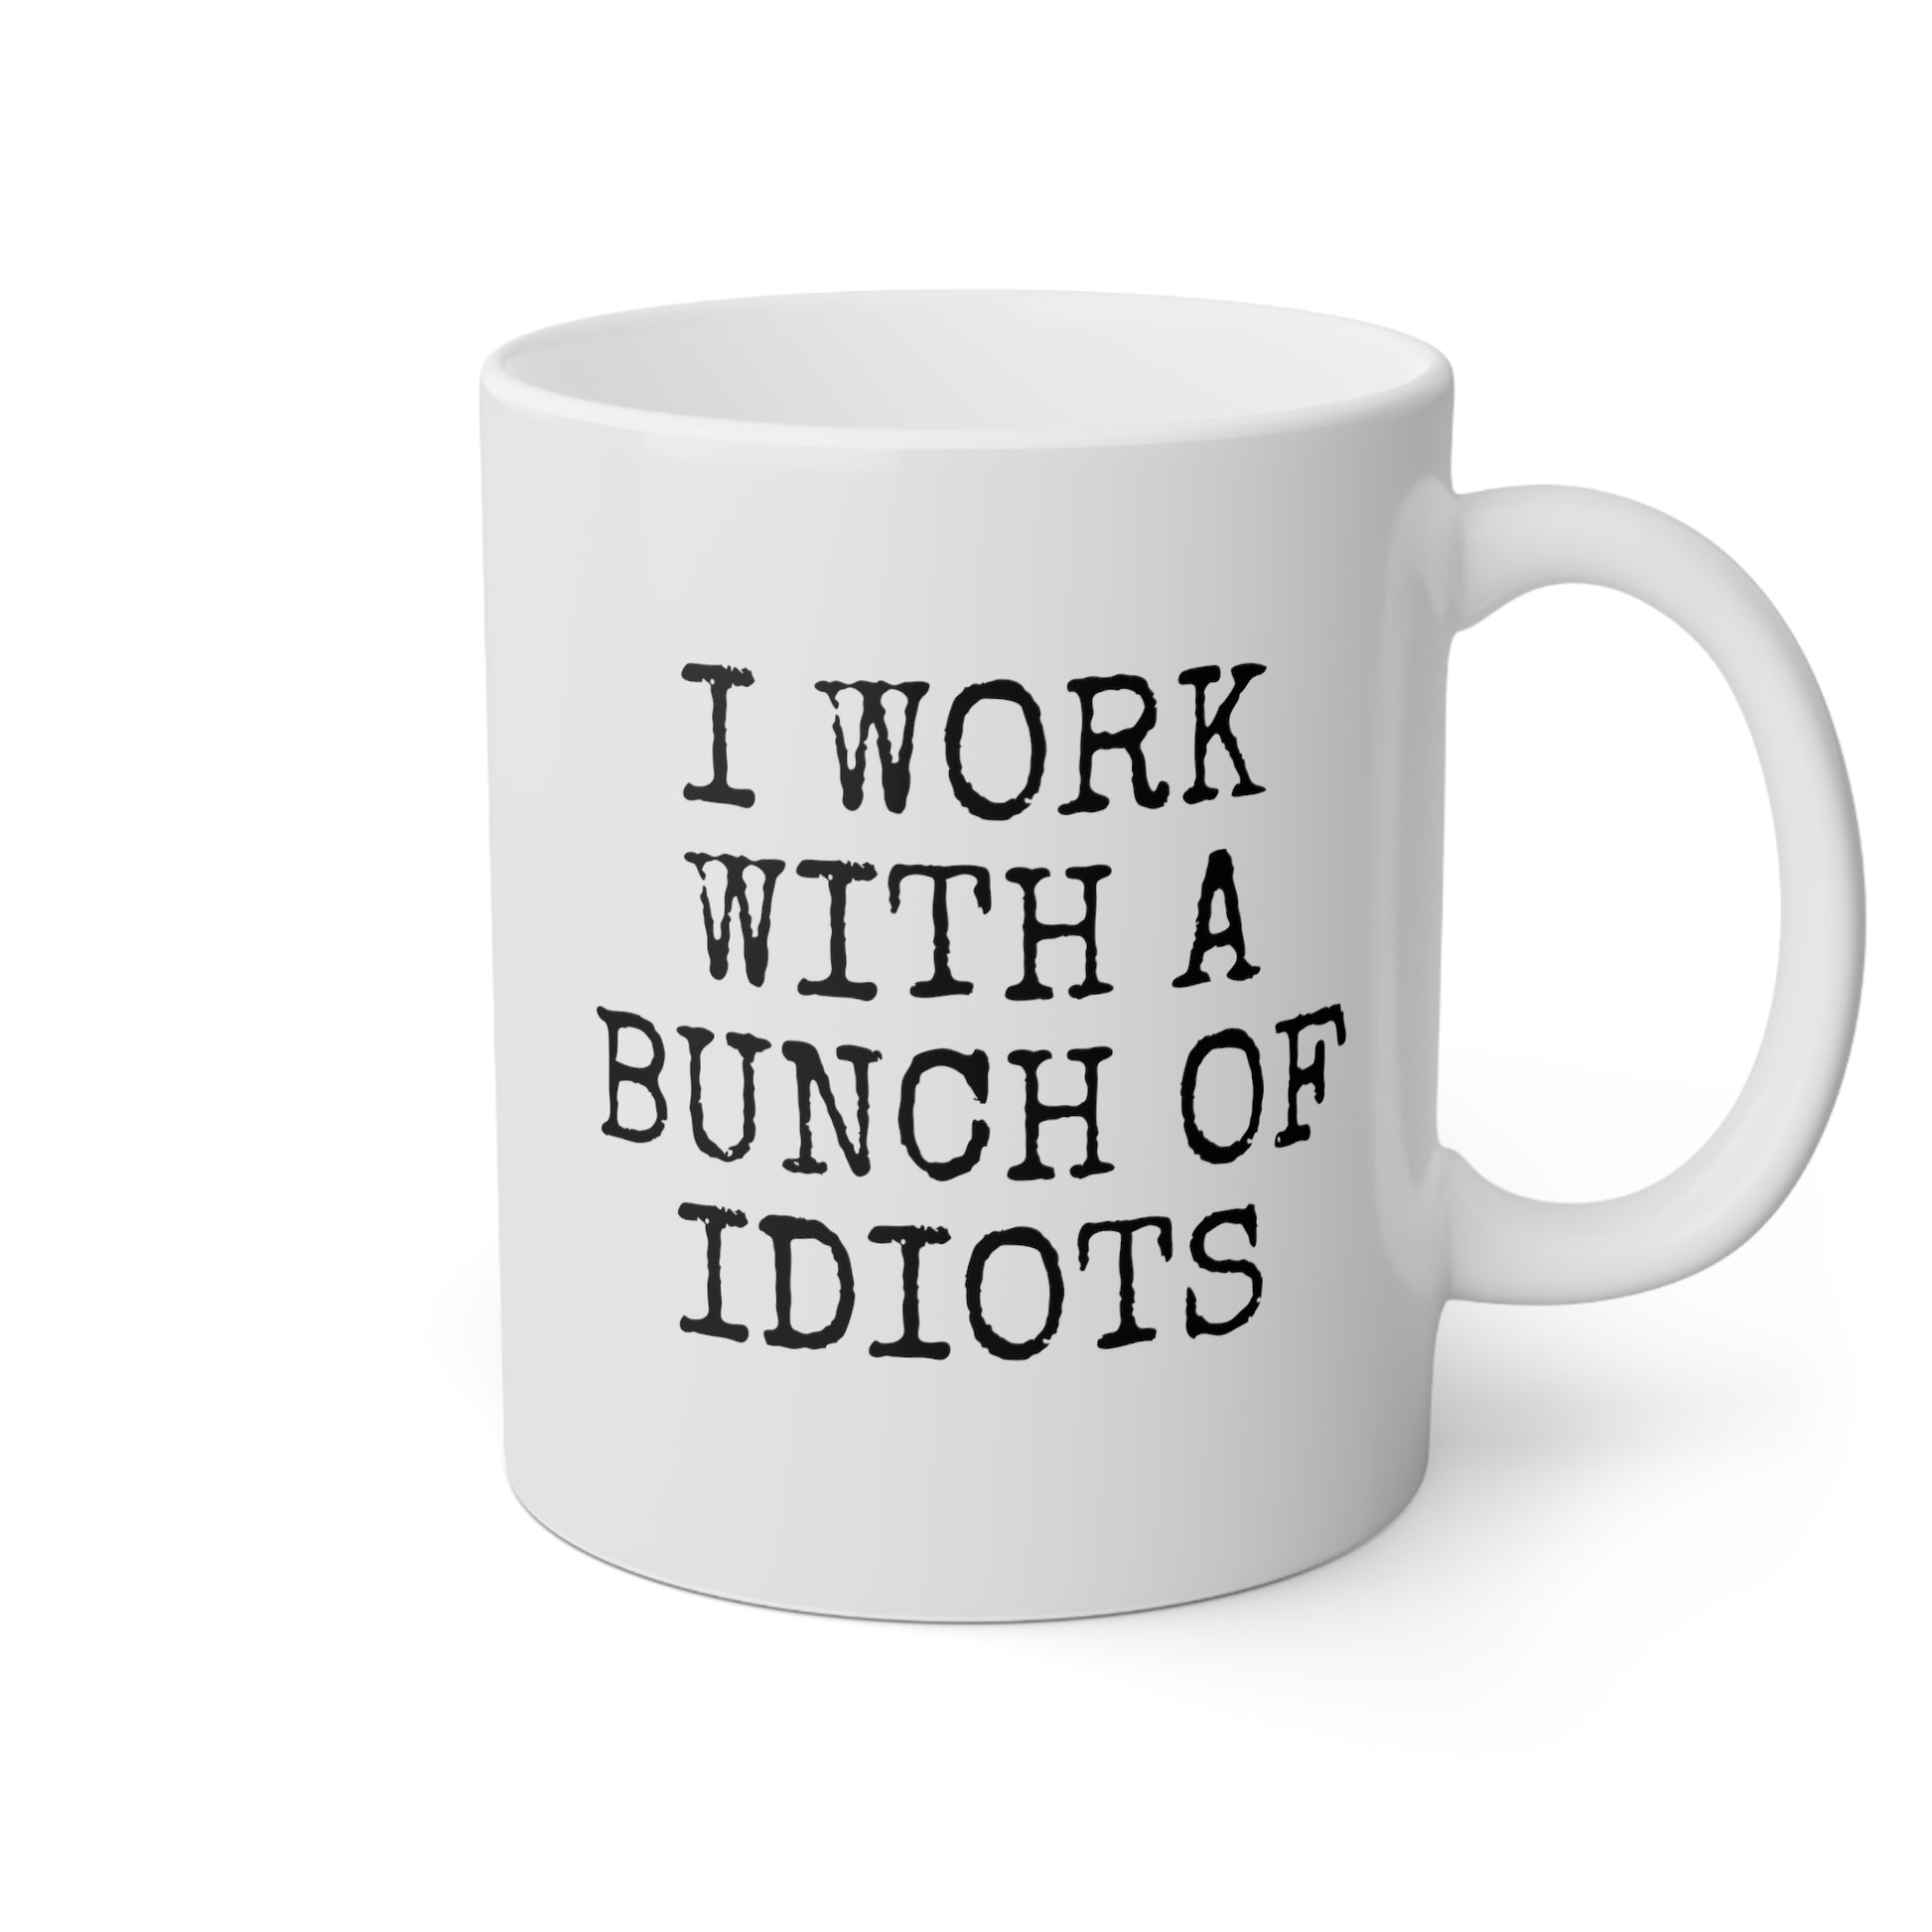 I Work With A Bunch Of Idiots 11oz white funny large coffee mug gift for coworker office humor novelty work joke christmas secret santa present waveywares wavey wares wavywares wavy wares